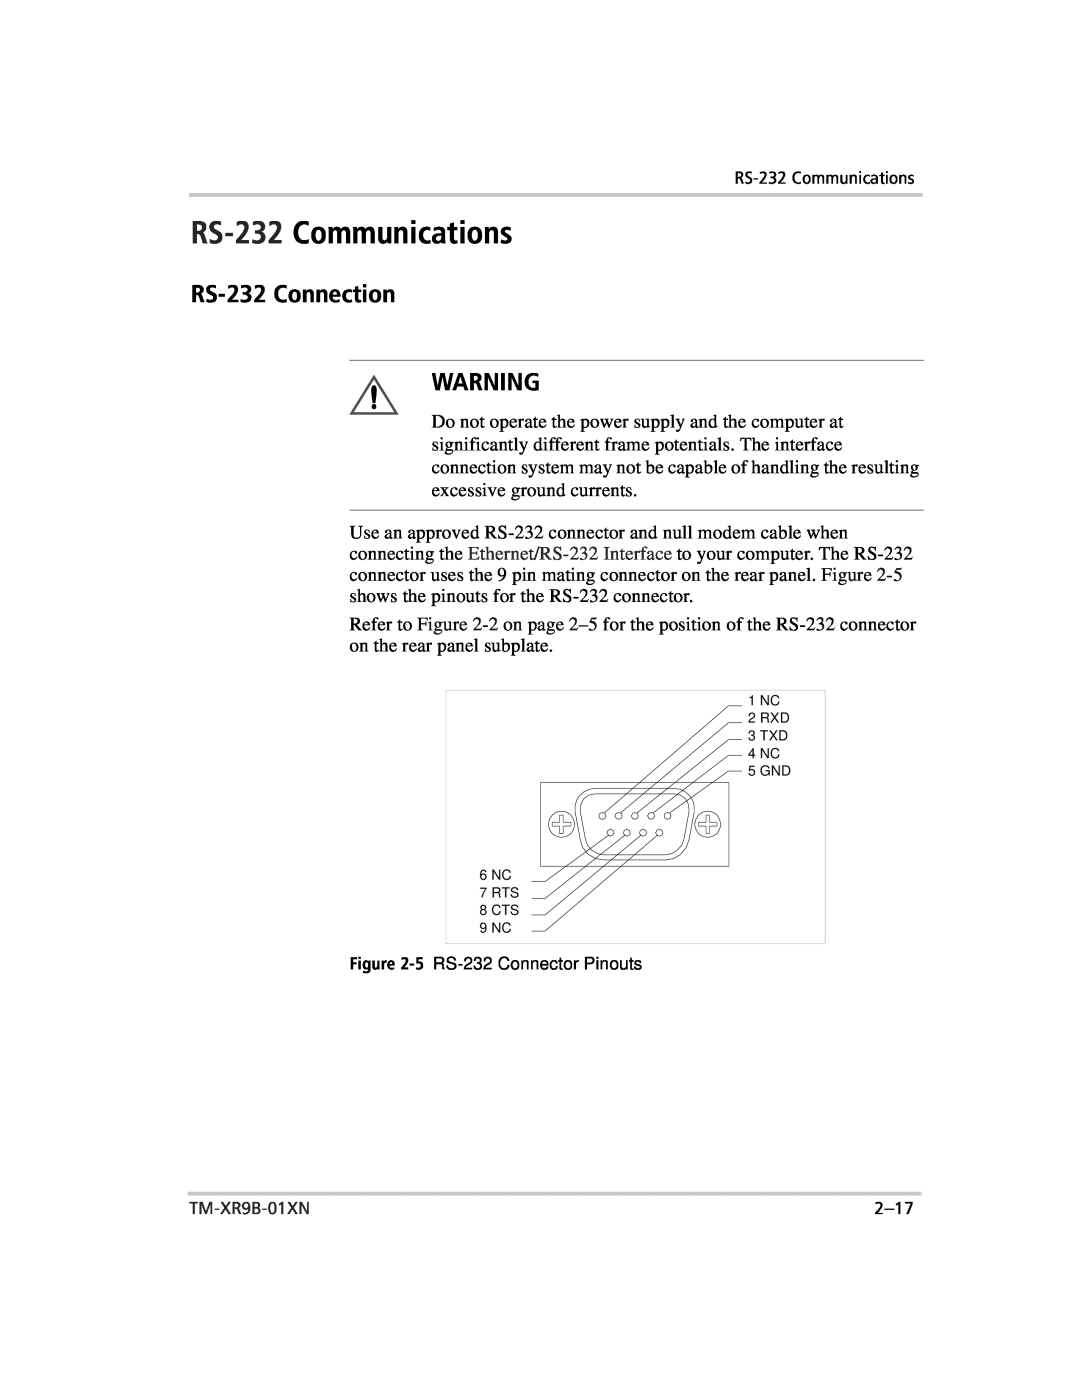 Xantrex Technology ENET-XFR3 manual RS-232 Communications, RS-232 Connection 